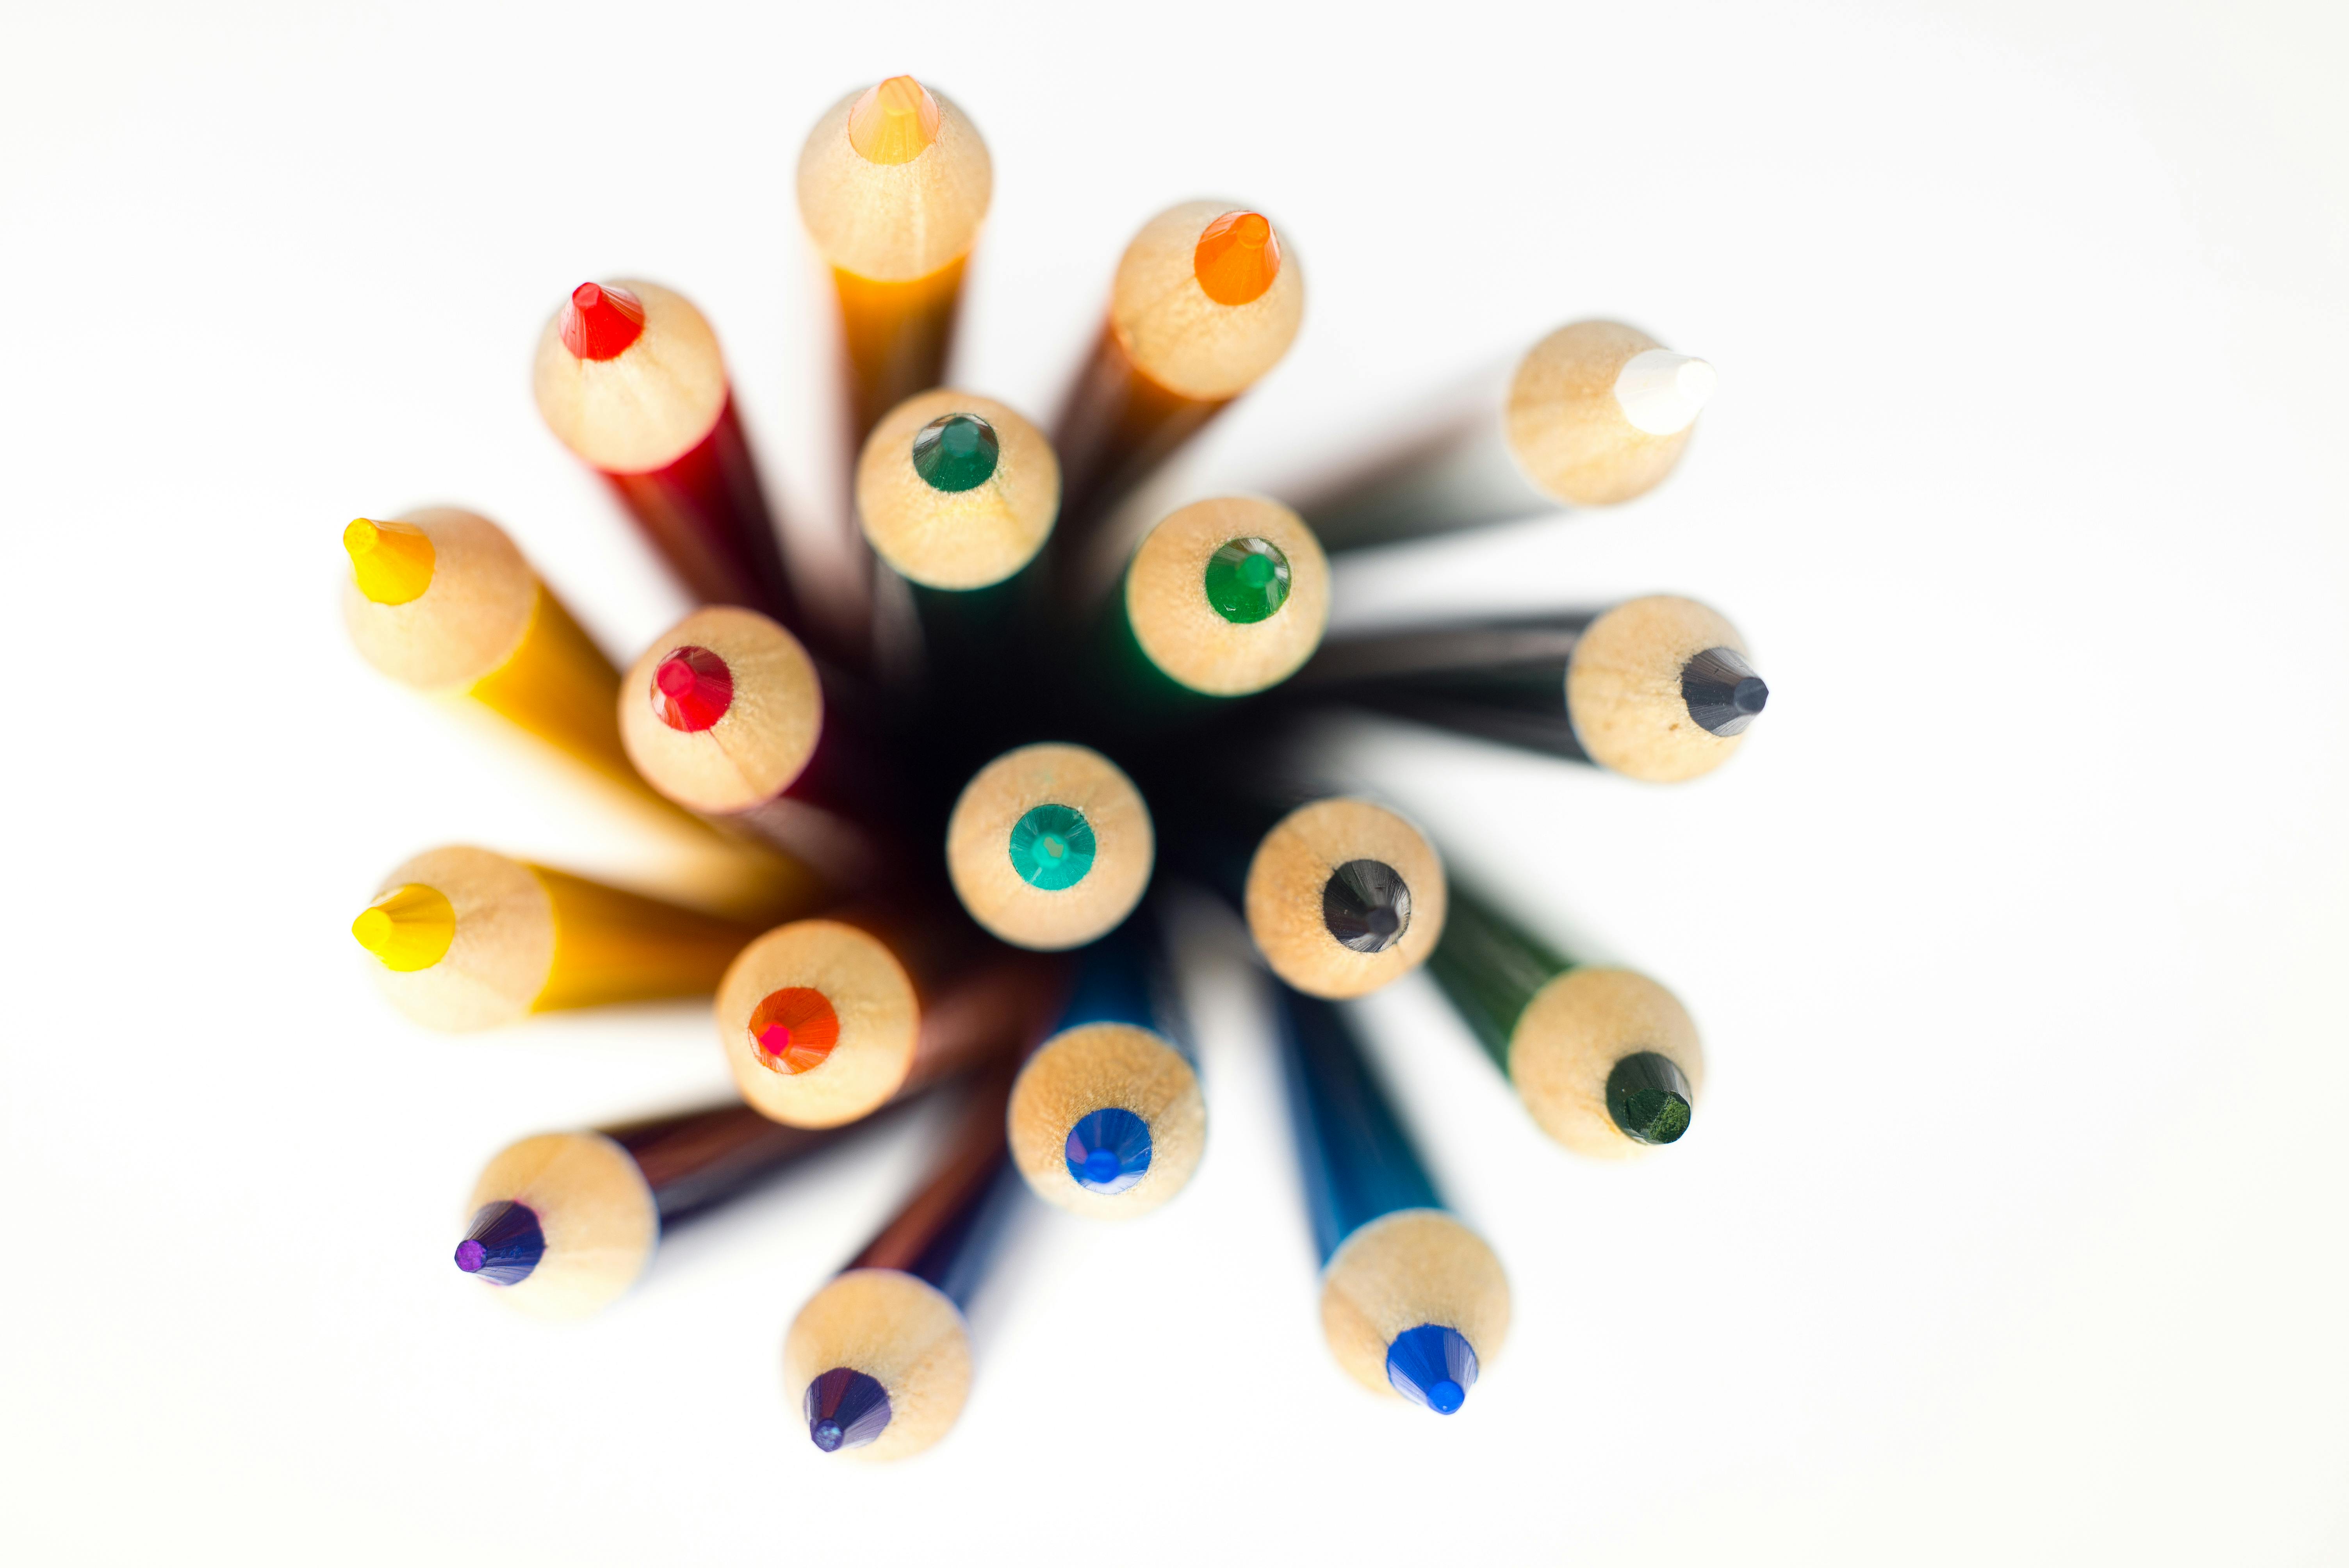 Assorted Pencil Colors · Free Stock Photo